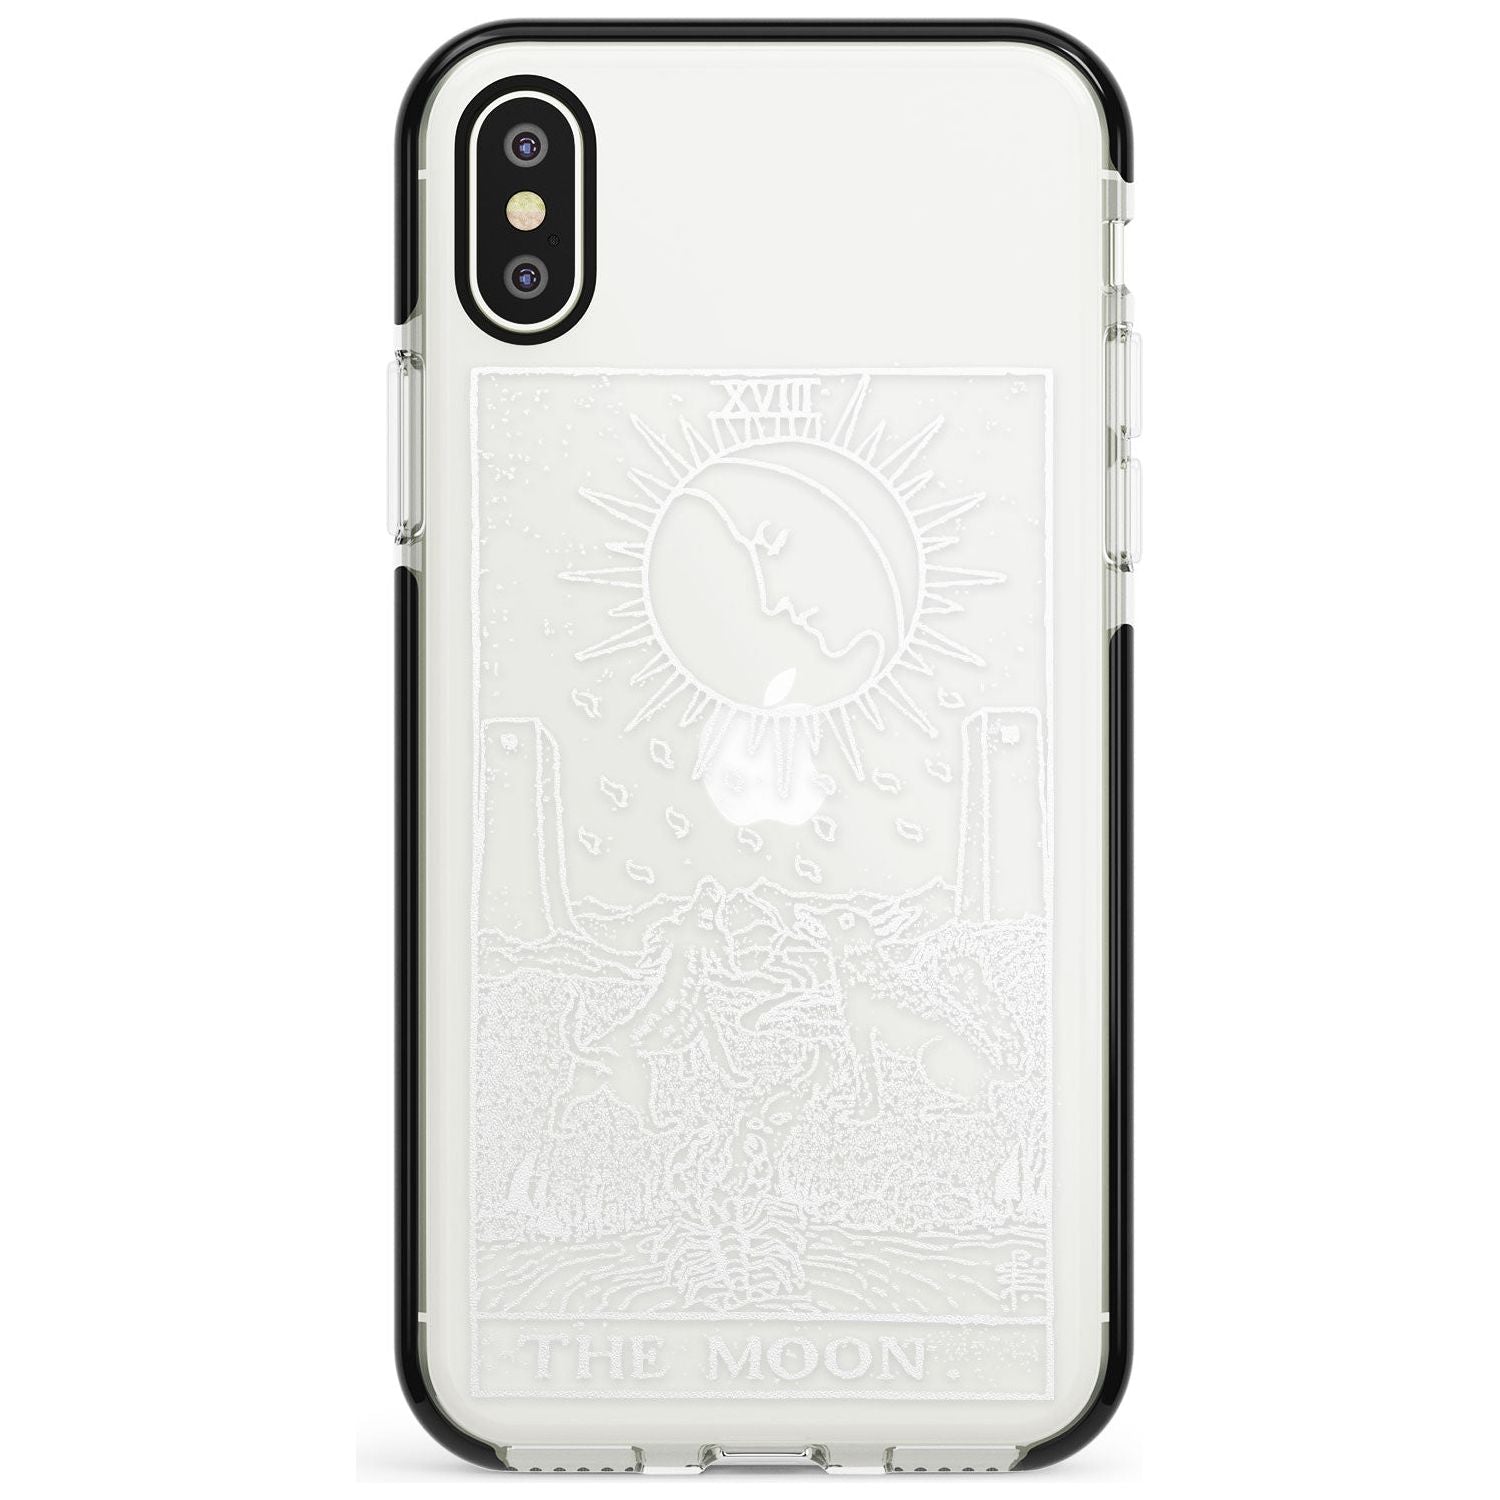 The Moon Tarot Card - White Transparent Pink Fade Impact Phone Case for iPhone X XS Max XR